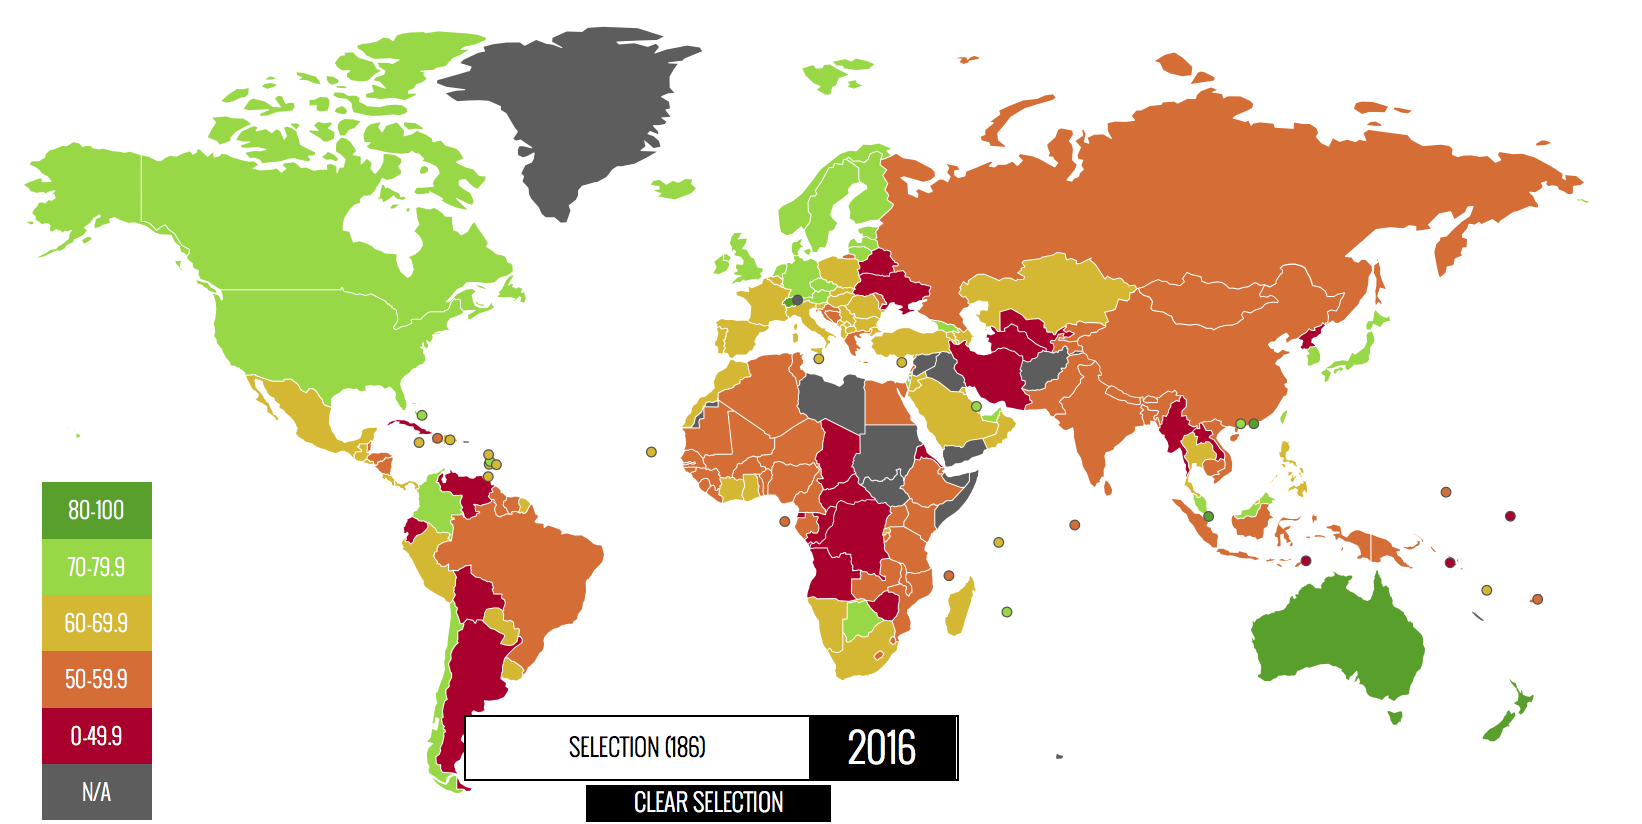 World Map Of WSj/Heritage Foundation Index of Economic Freedom for 2016